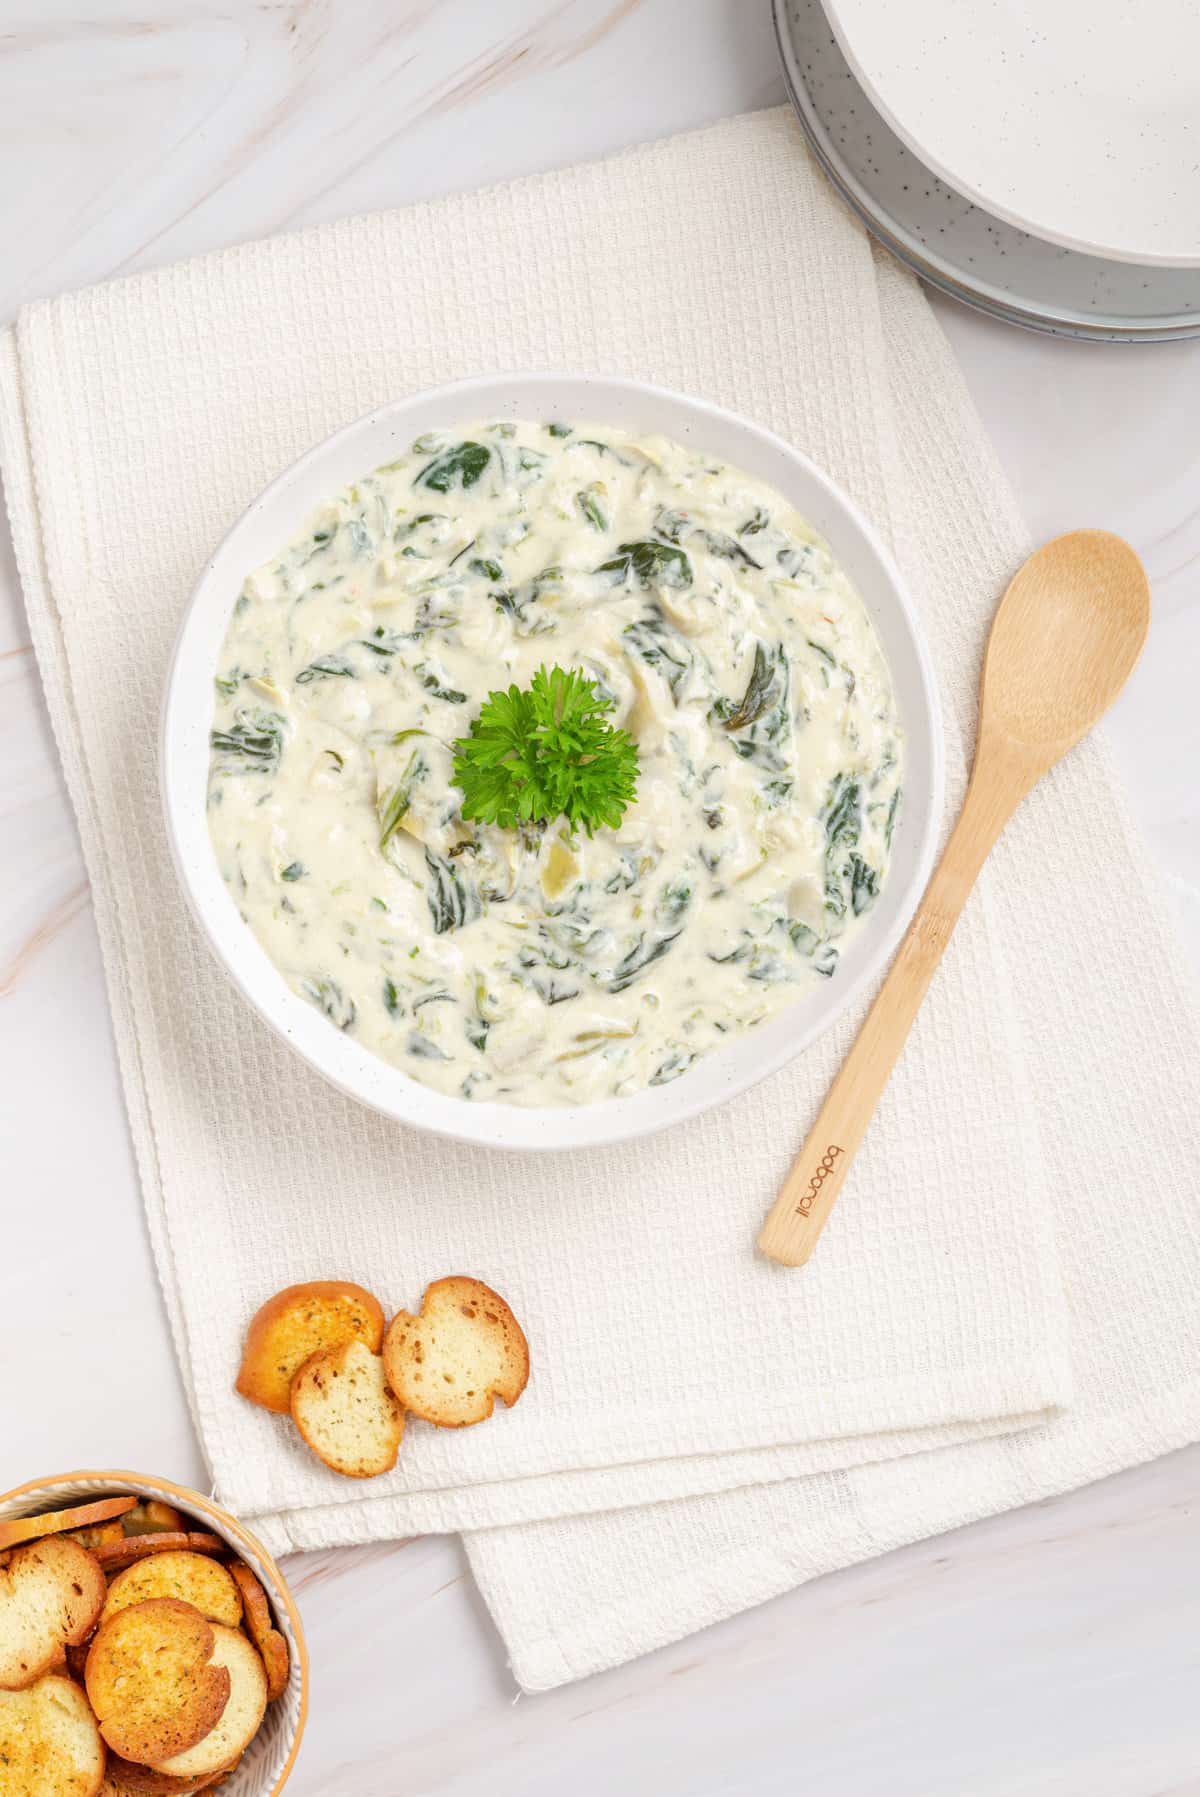 Overhead view of bowl of Instant Pot spinach artichoke dip with parsley garnish, crostini and wooden spatula on the side.